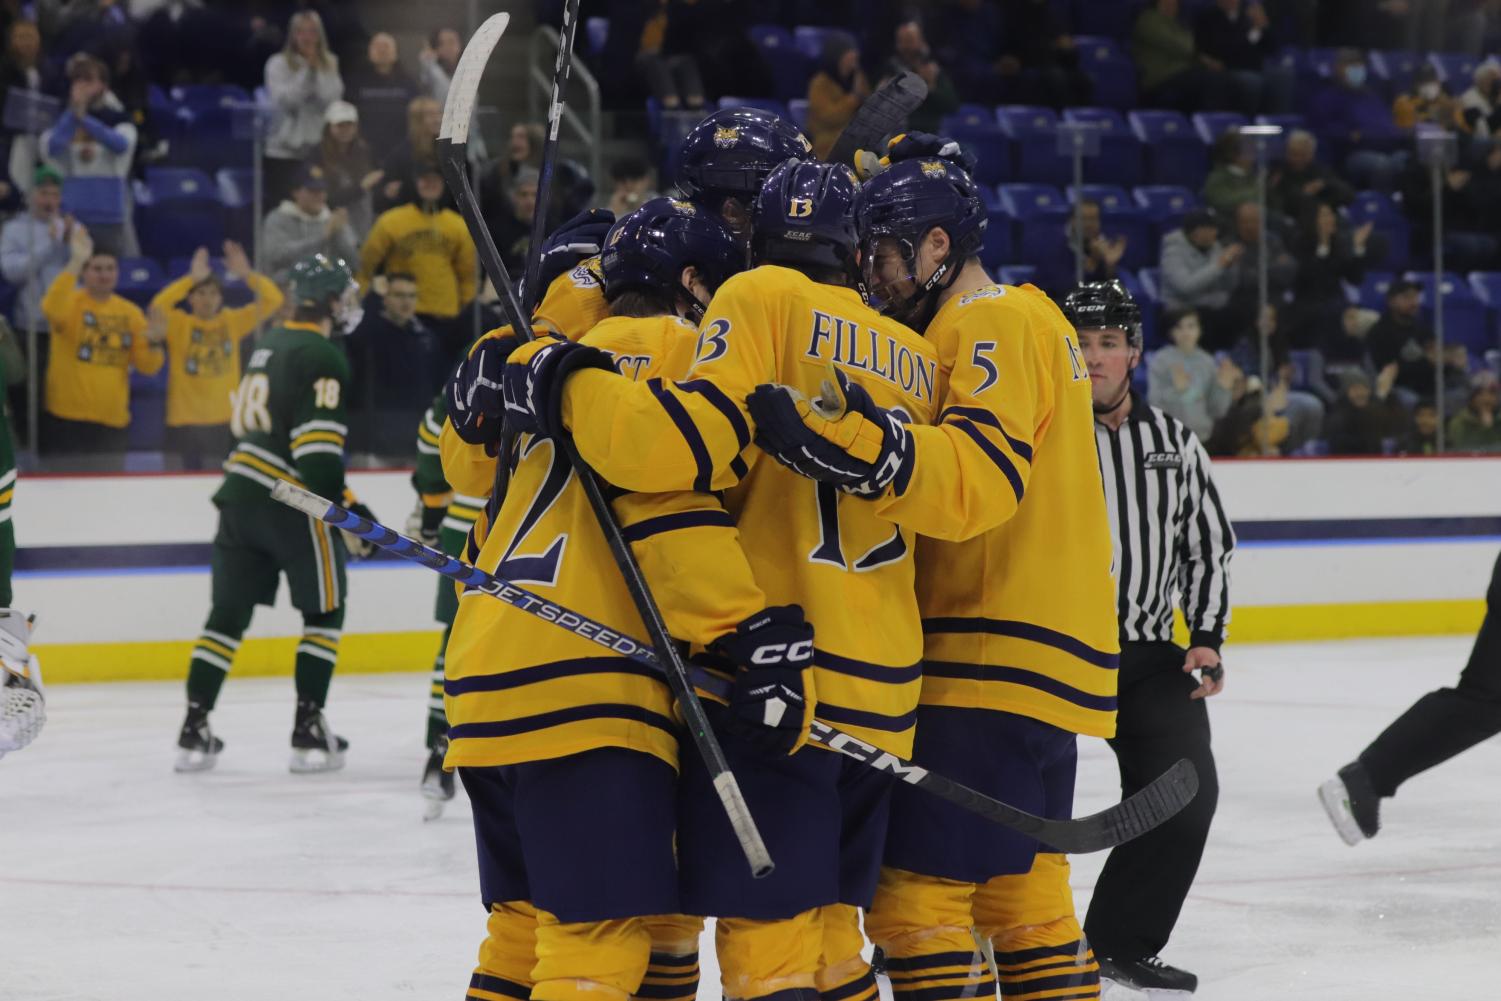 Men's Ice Hockey Scores Six Unanswered Goals to Rally For 6-3 Win